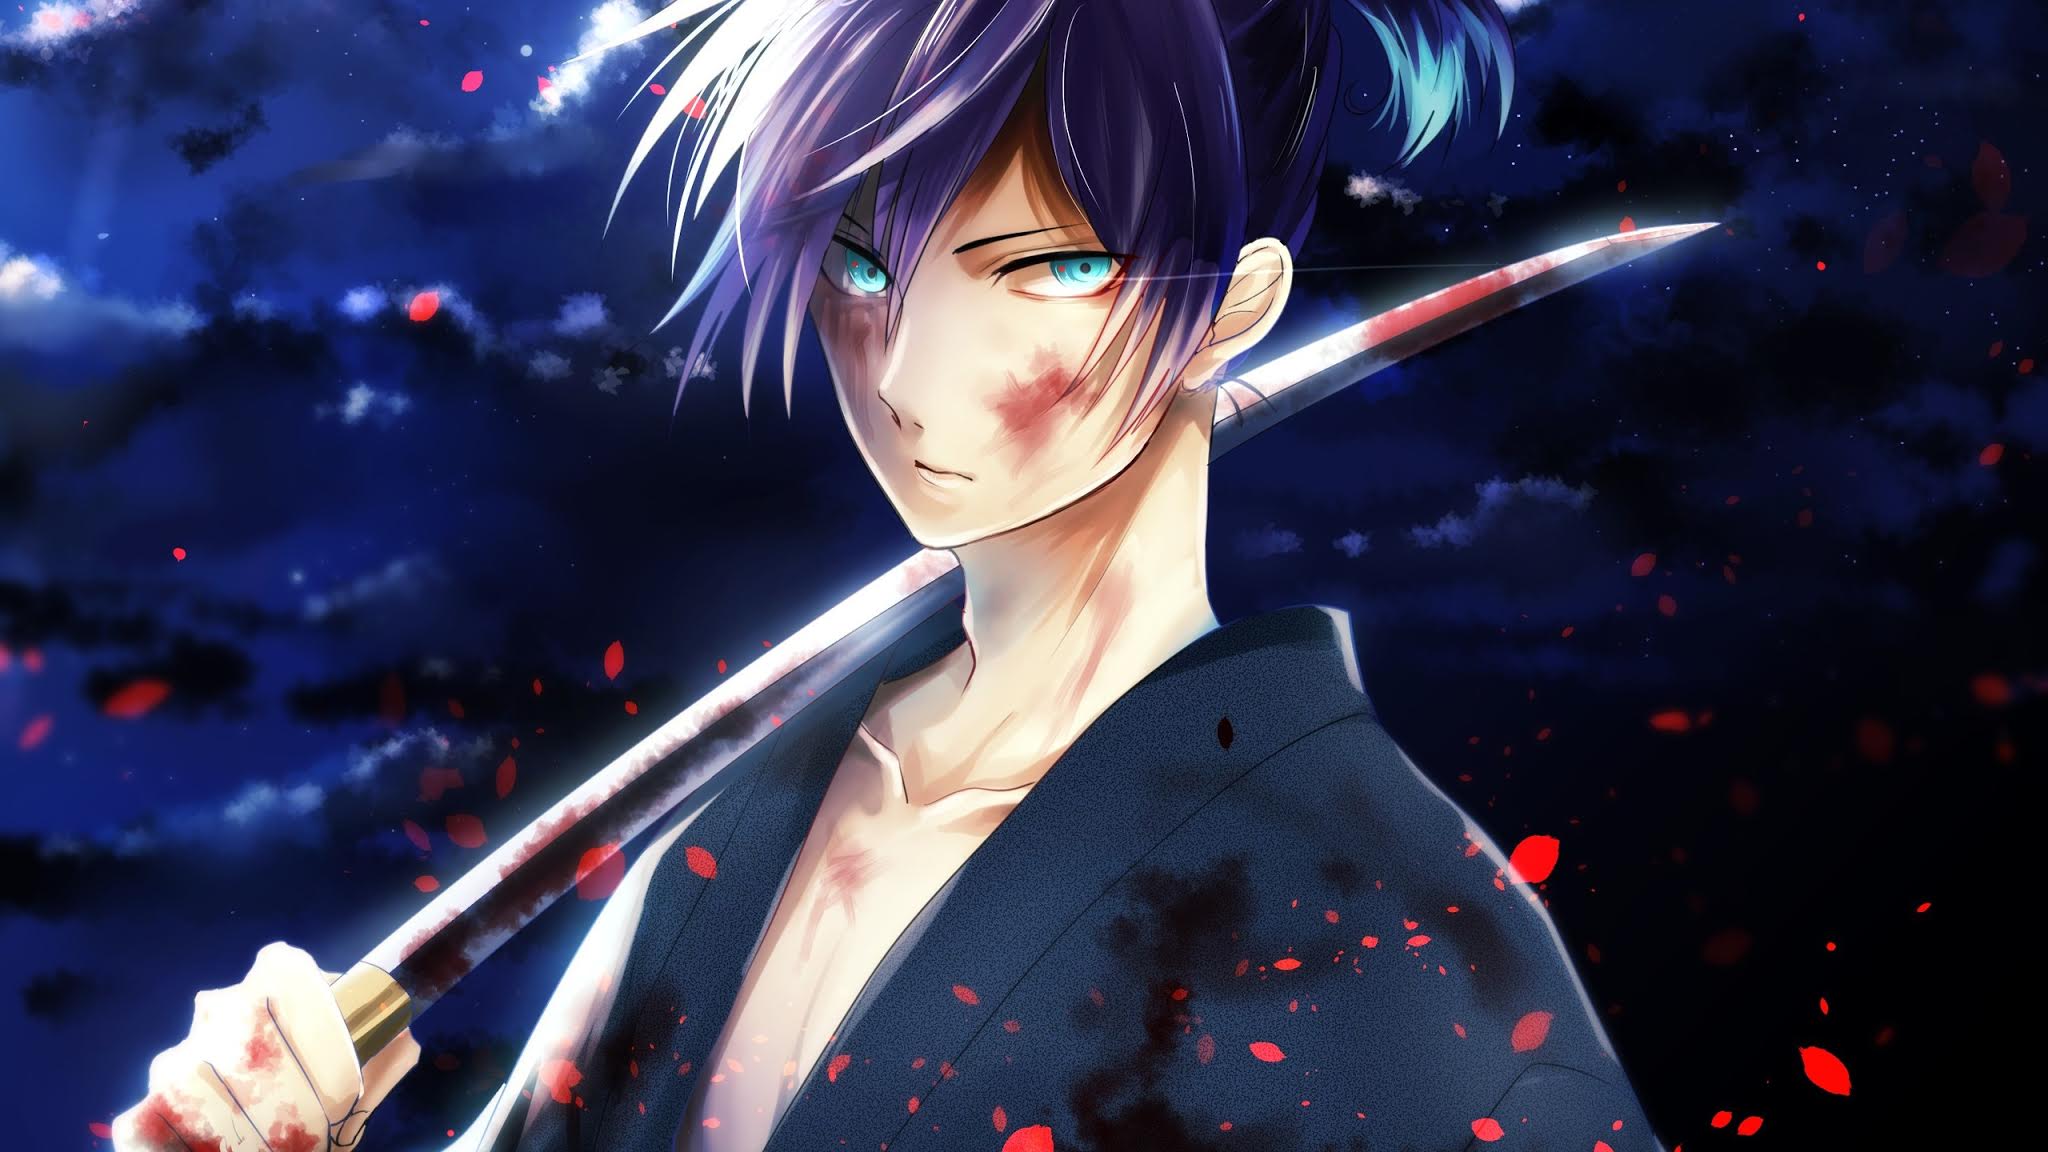 2. Yato from Noragami - wide 2